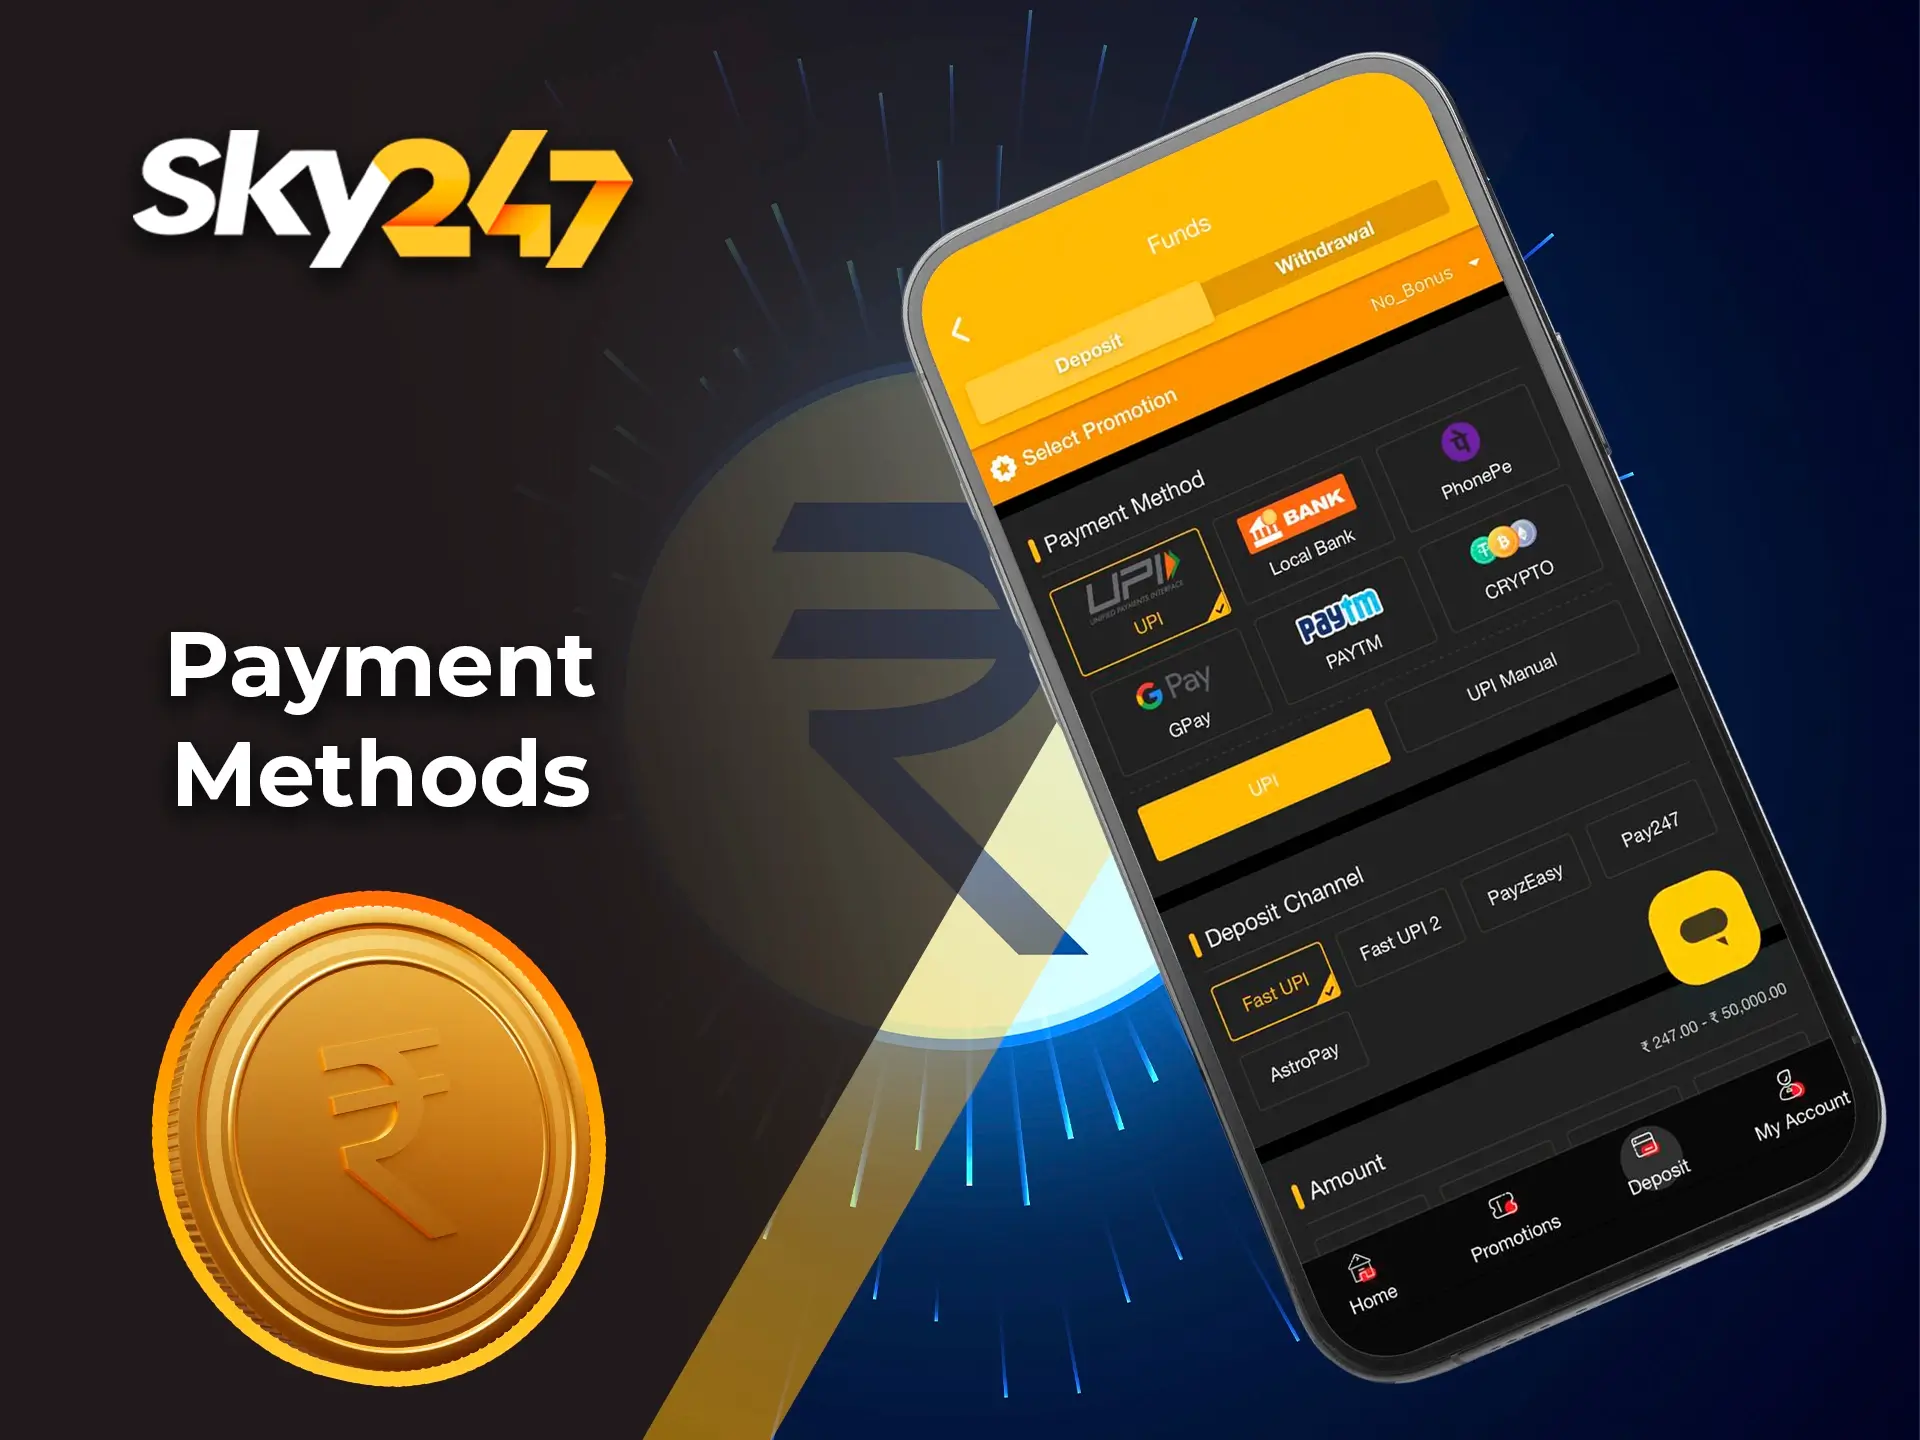 Use only favourable and convenient for you withdrawal and deposit methods at Sky247 Casino.